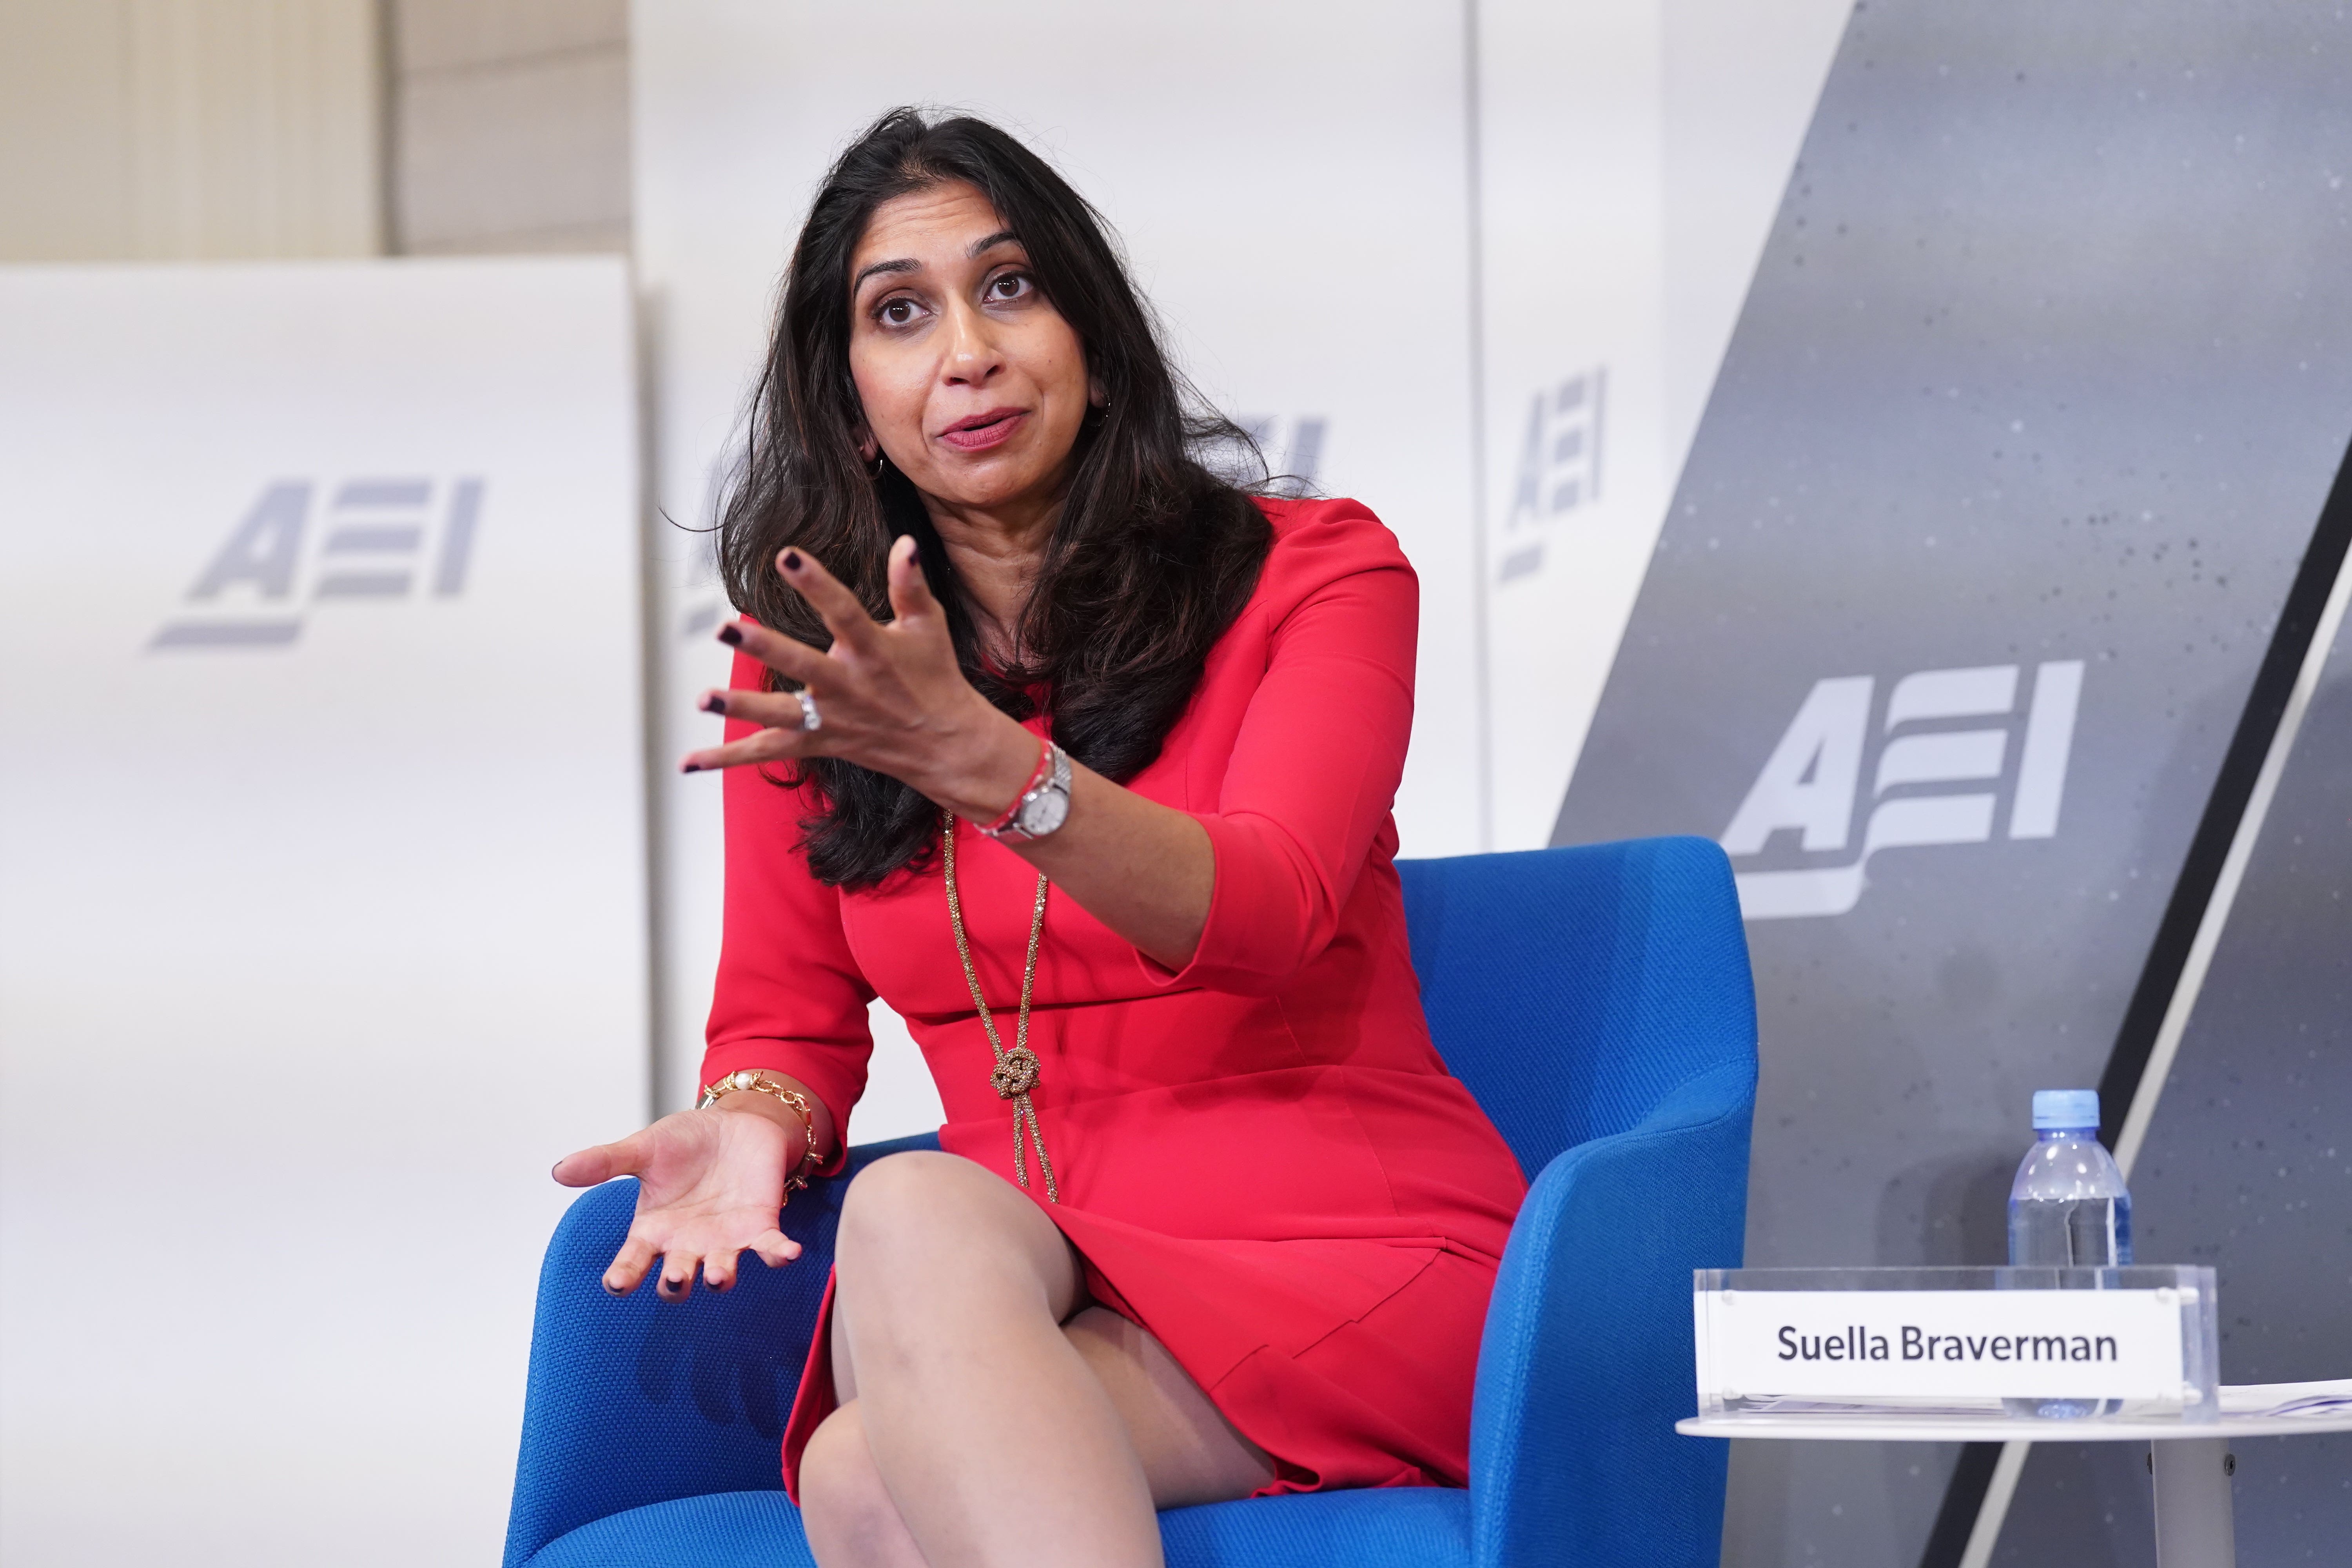 Suella Braverman called for reform of the UN Refugee Convention